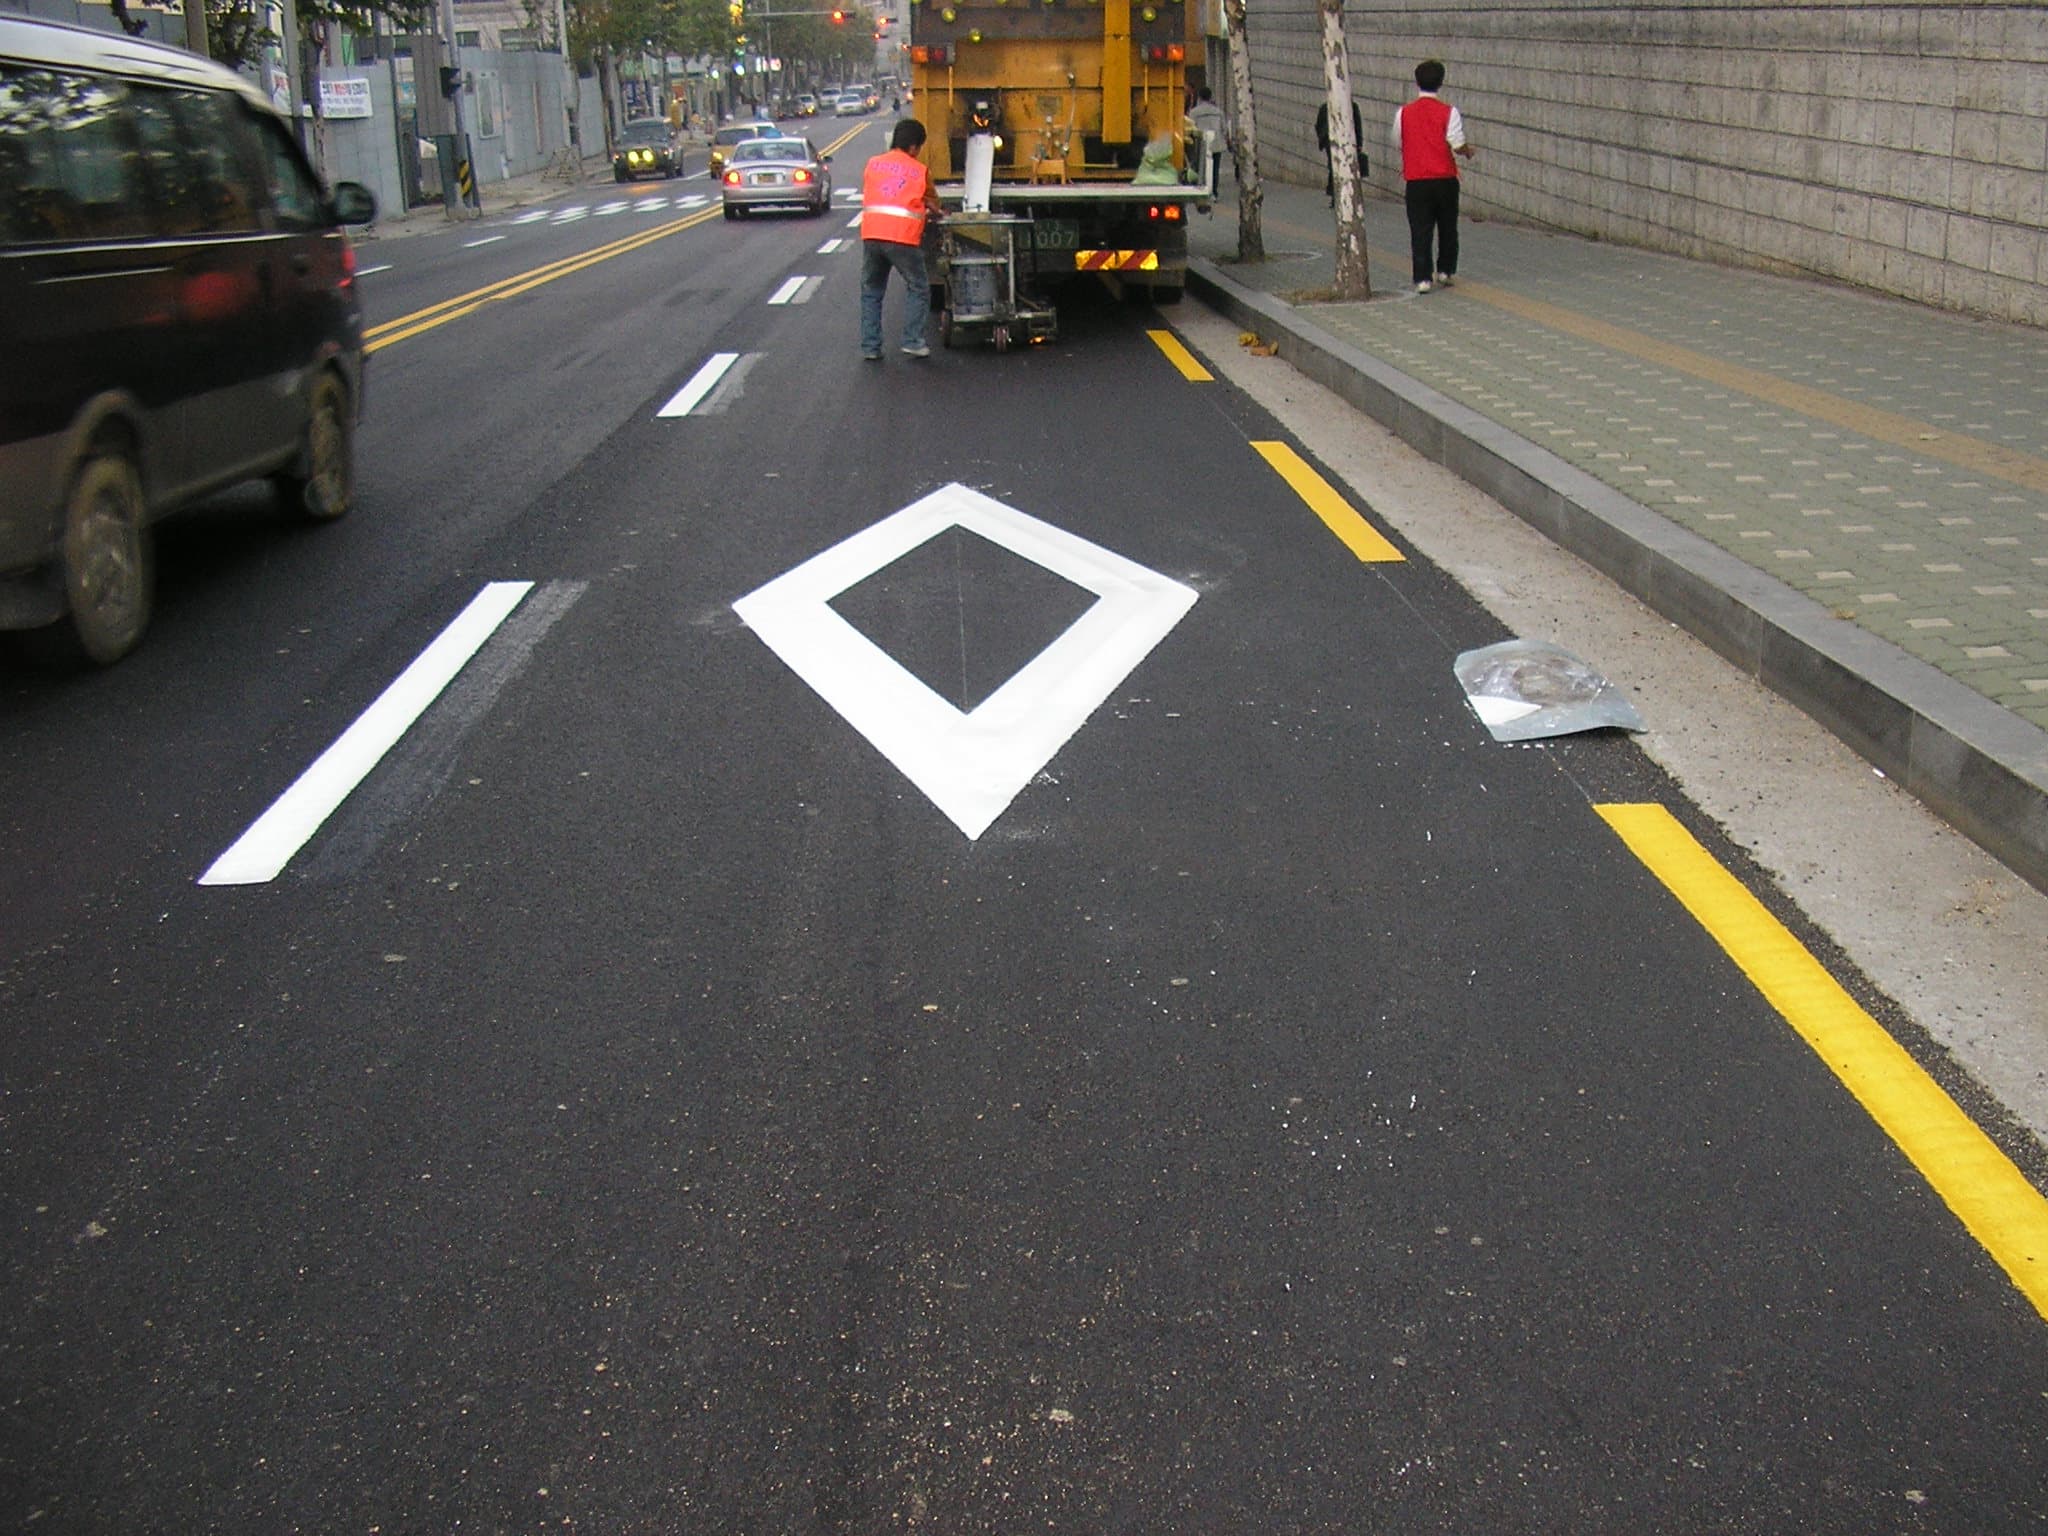 Thermoplastic paint for roadmarking